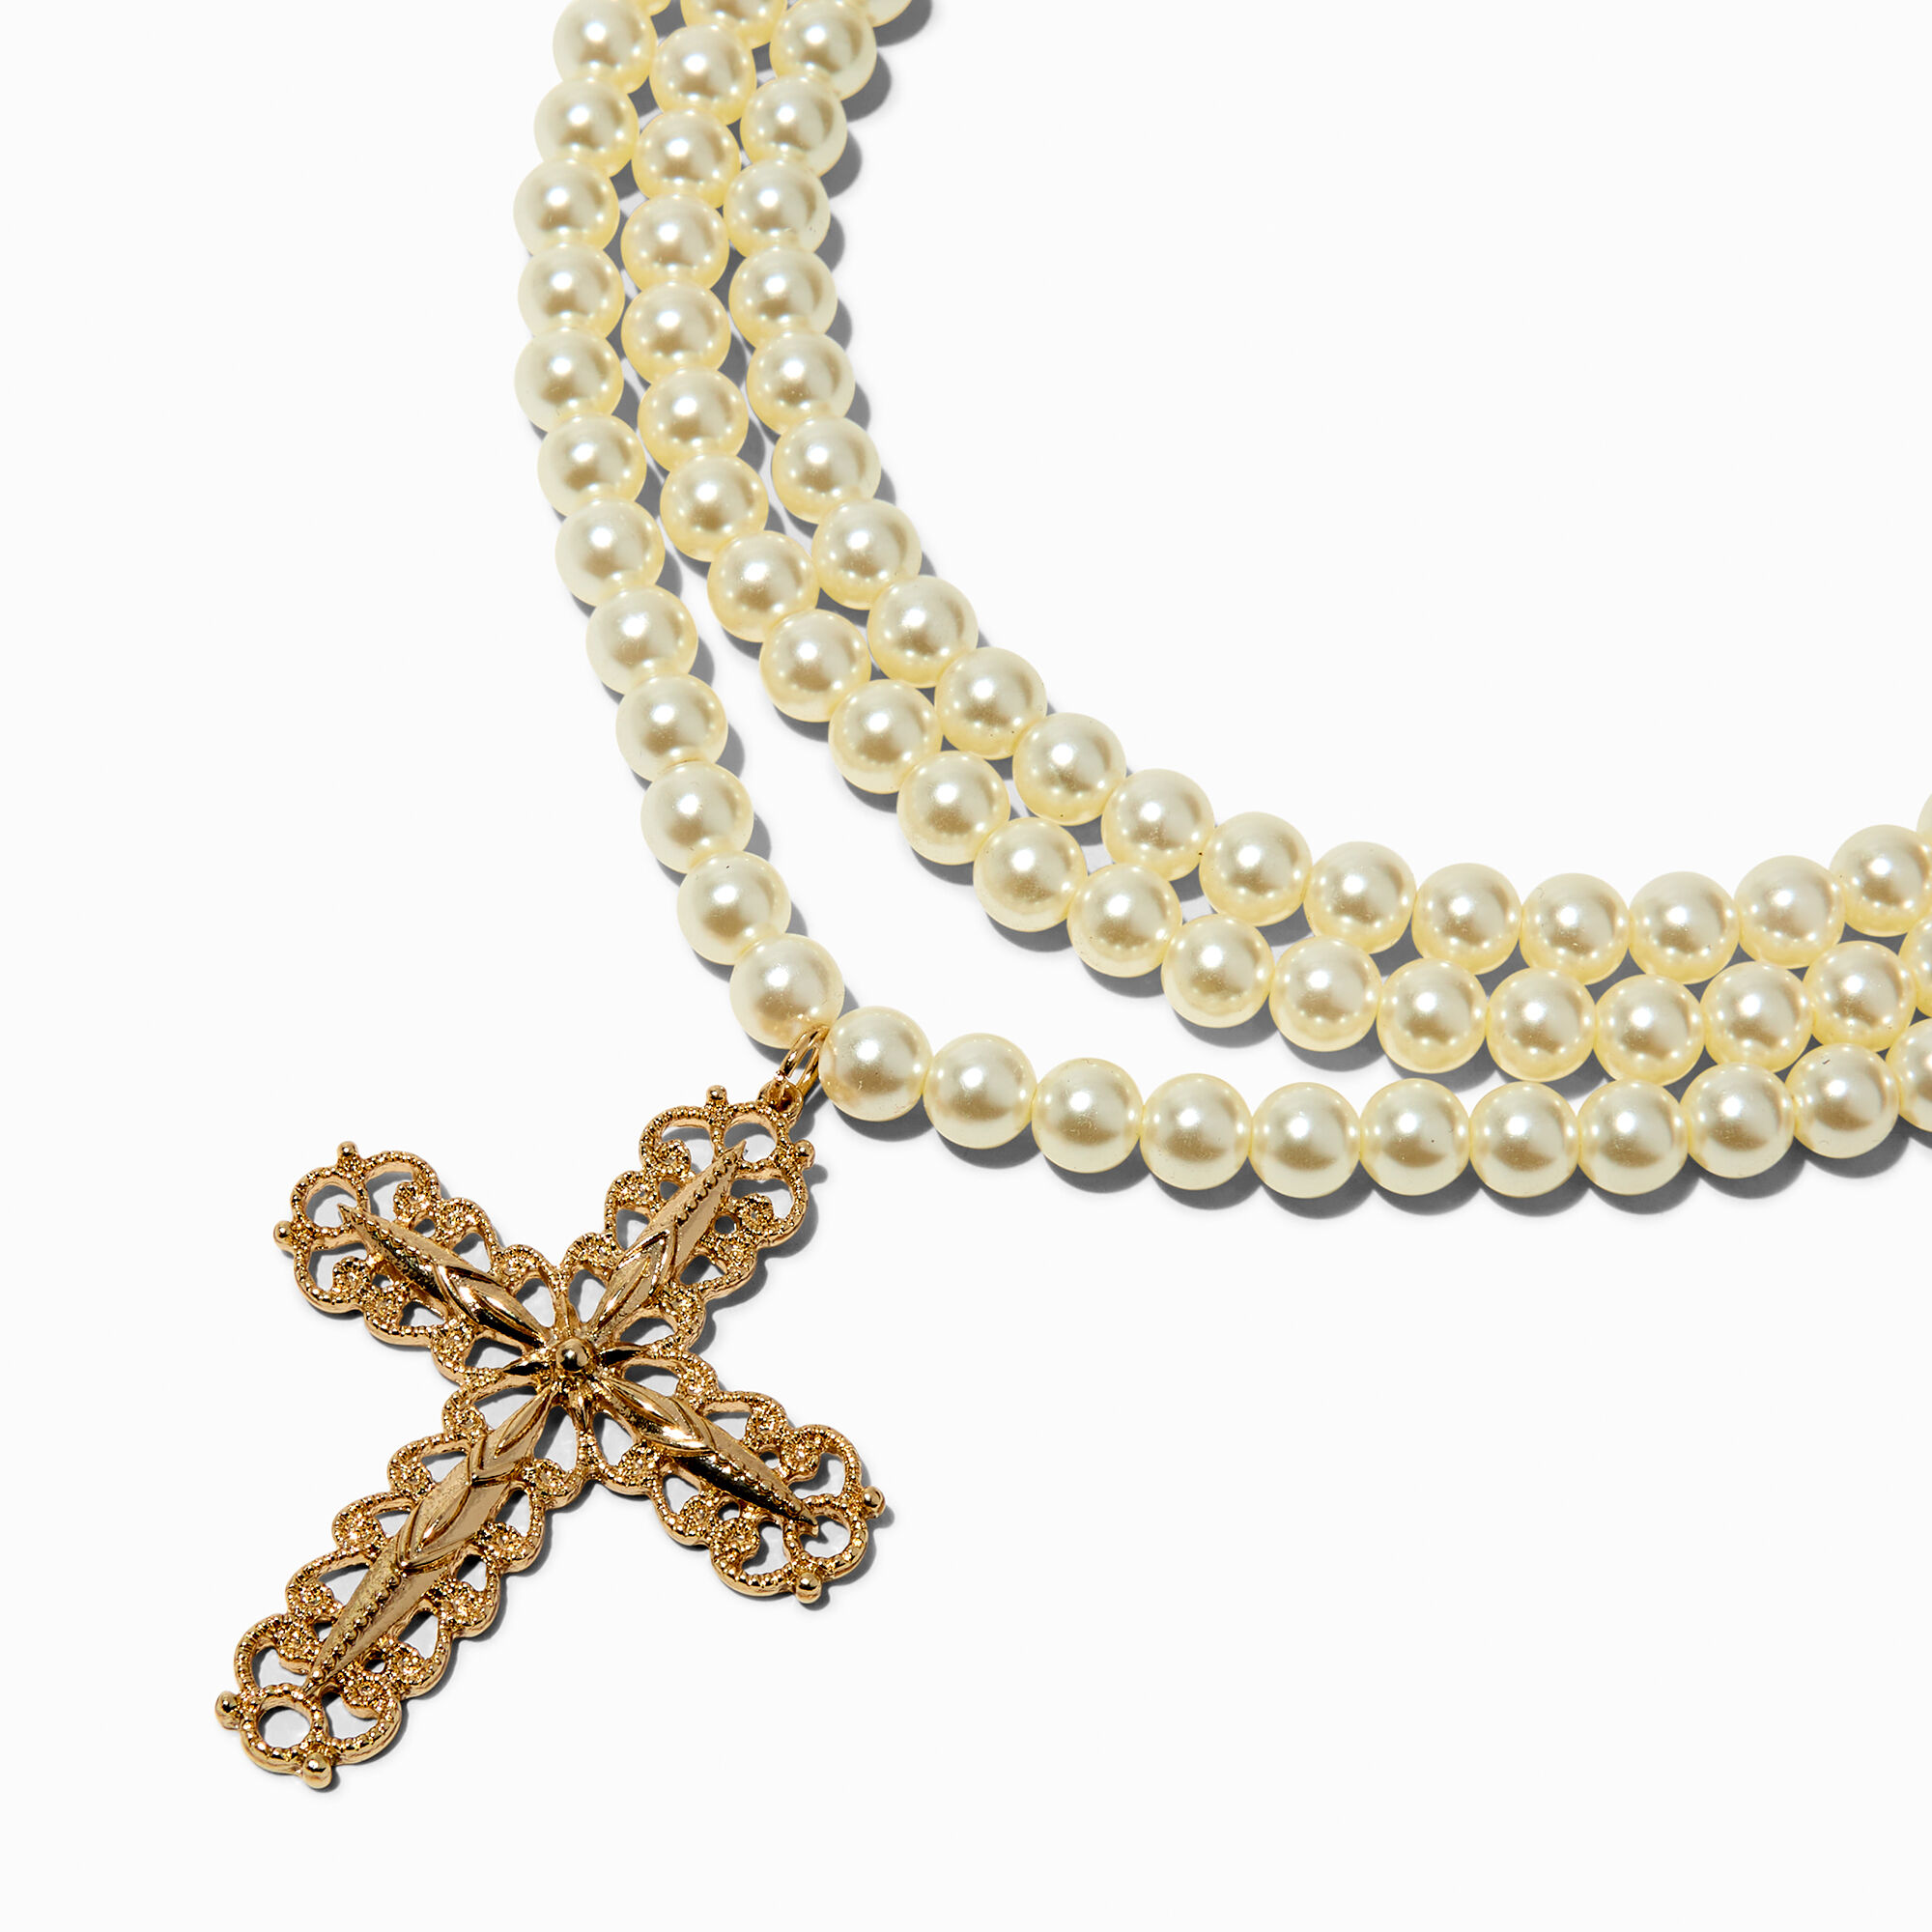 View Claires Tone Ornate Cross Pendant Faux Pearl MultiStrand Necklace Gold information